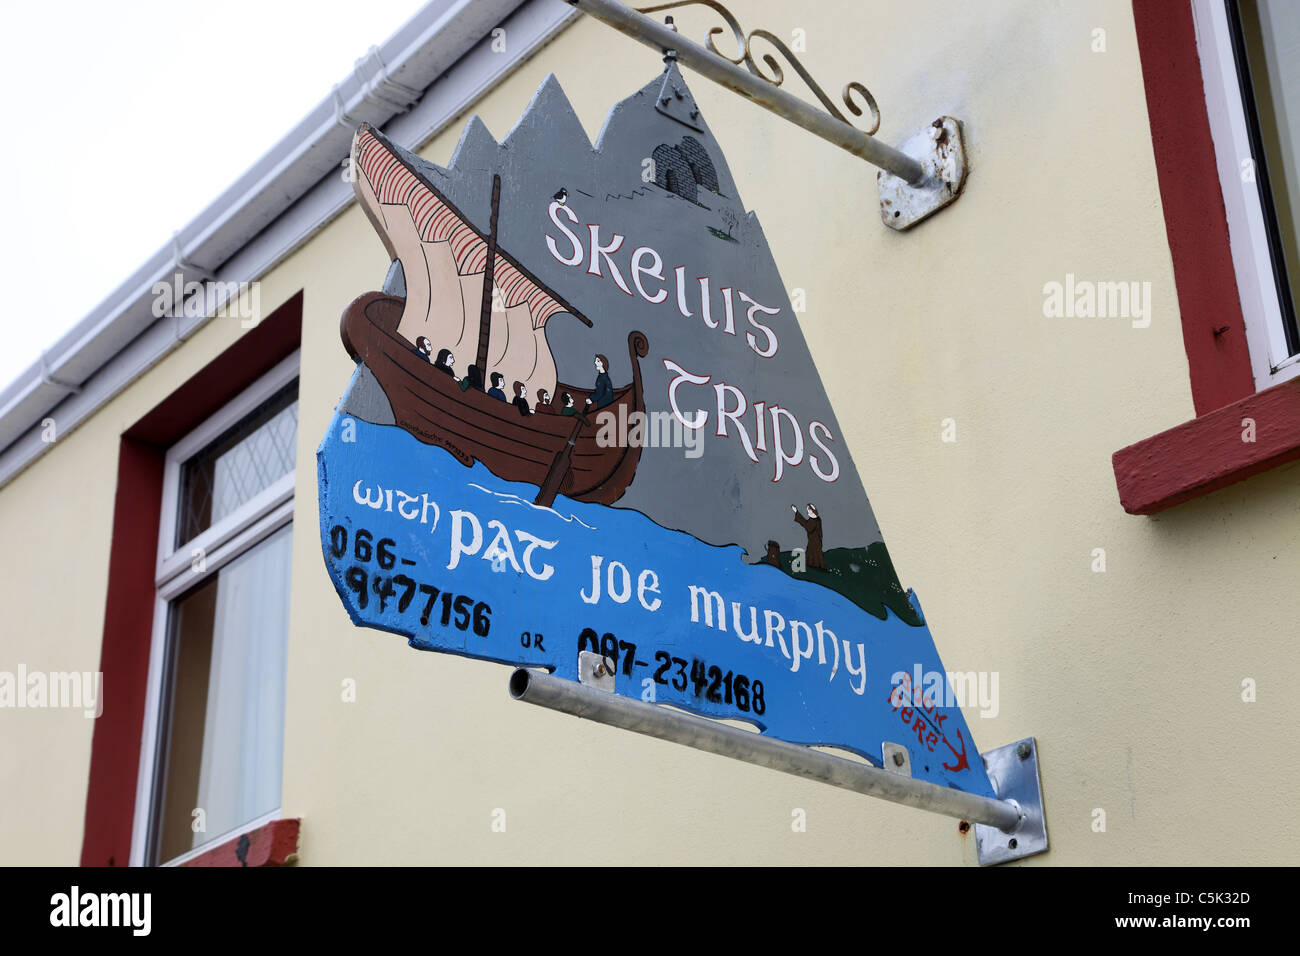 Skellig trips sign, Portmagee, Co Kerry, Ireland Stock Photo